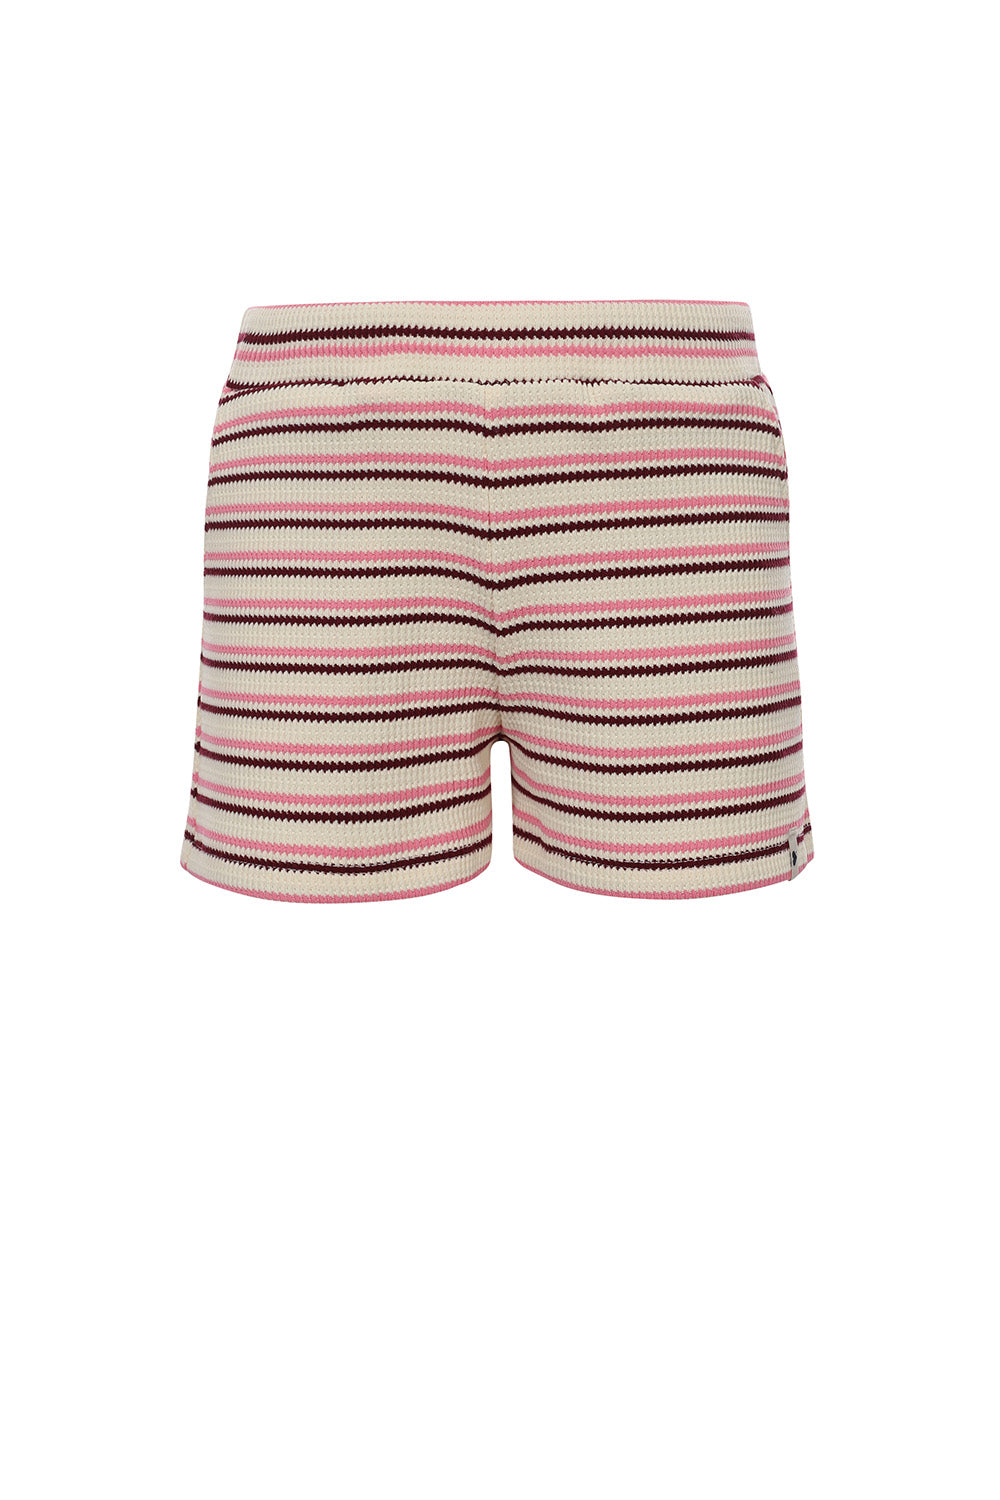 LOOXS Little Knitted Short